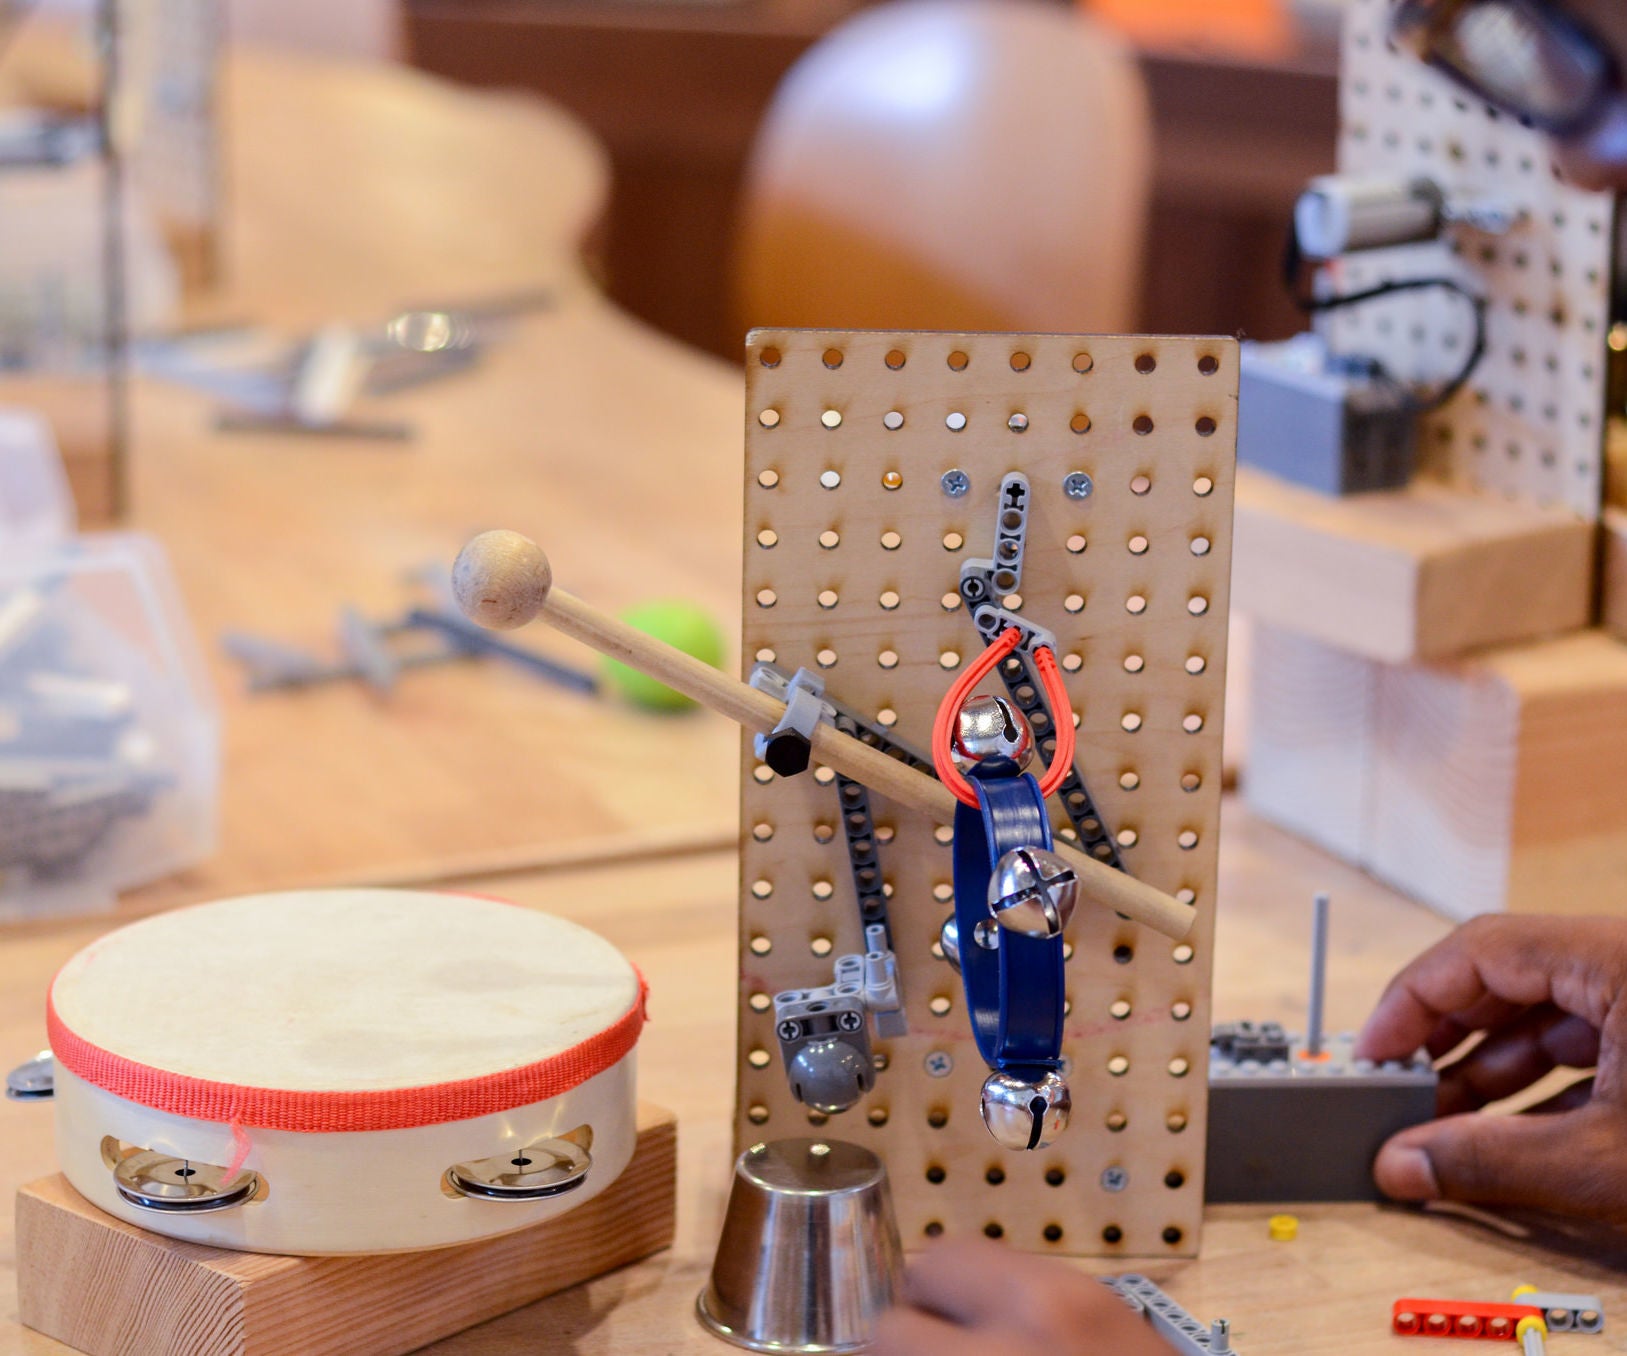 Tinkering With LEGO: Sound Machines